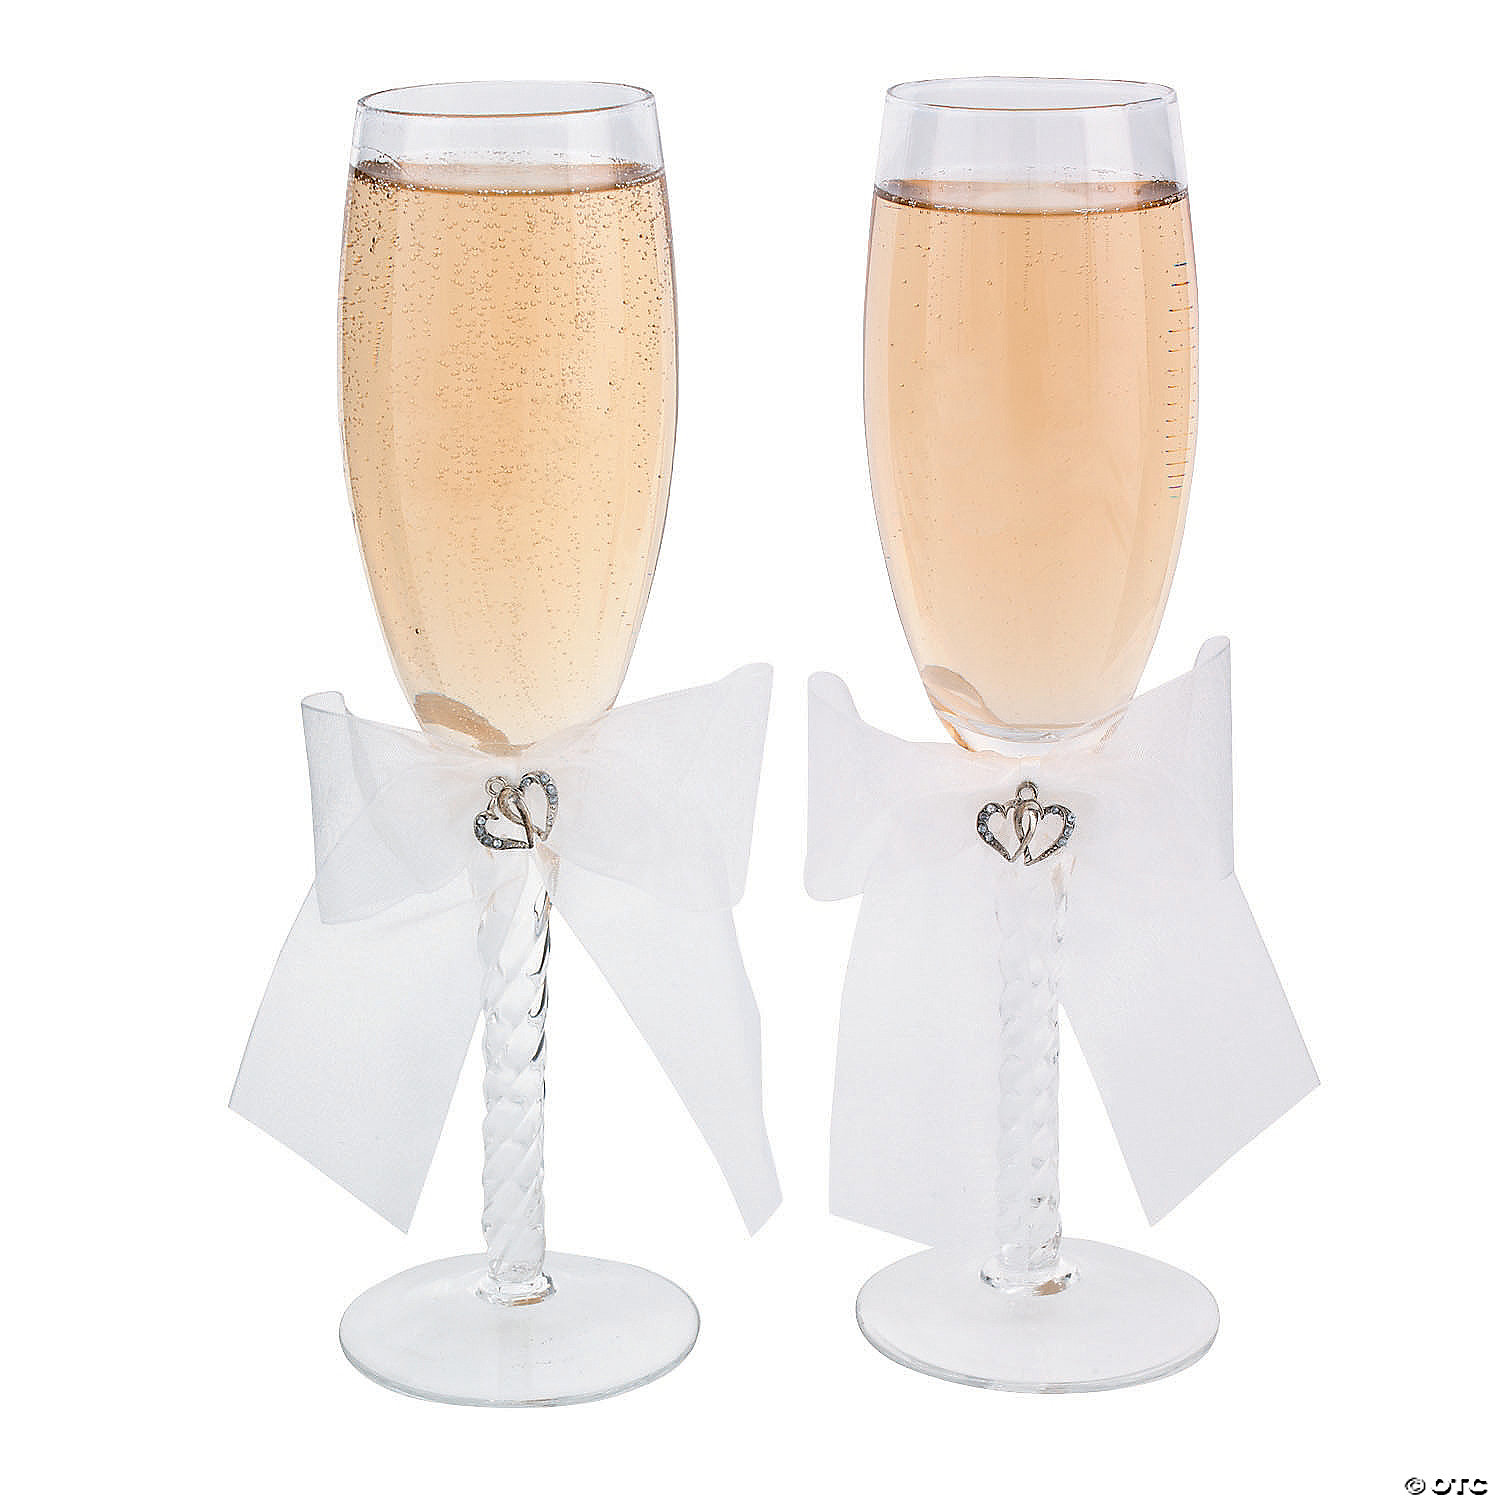 or Parties Anniversaries Double Heart Champagne Toasting Glass Flutes and Cake Server Set for Weddings 